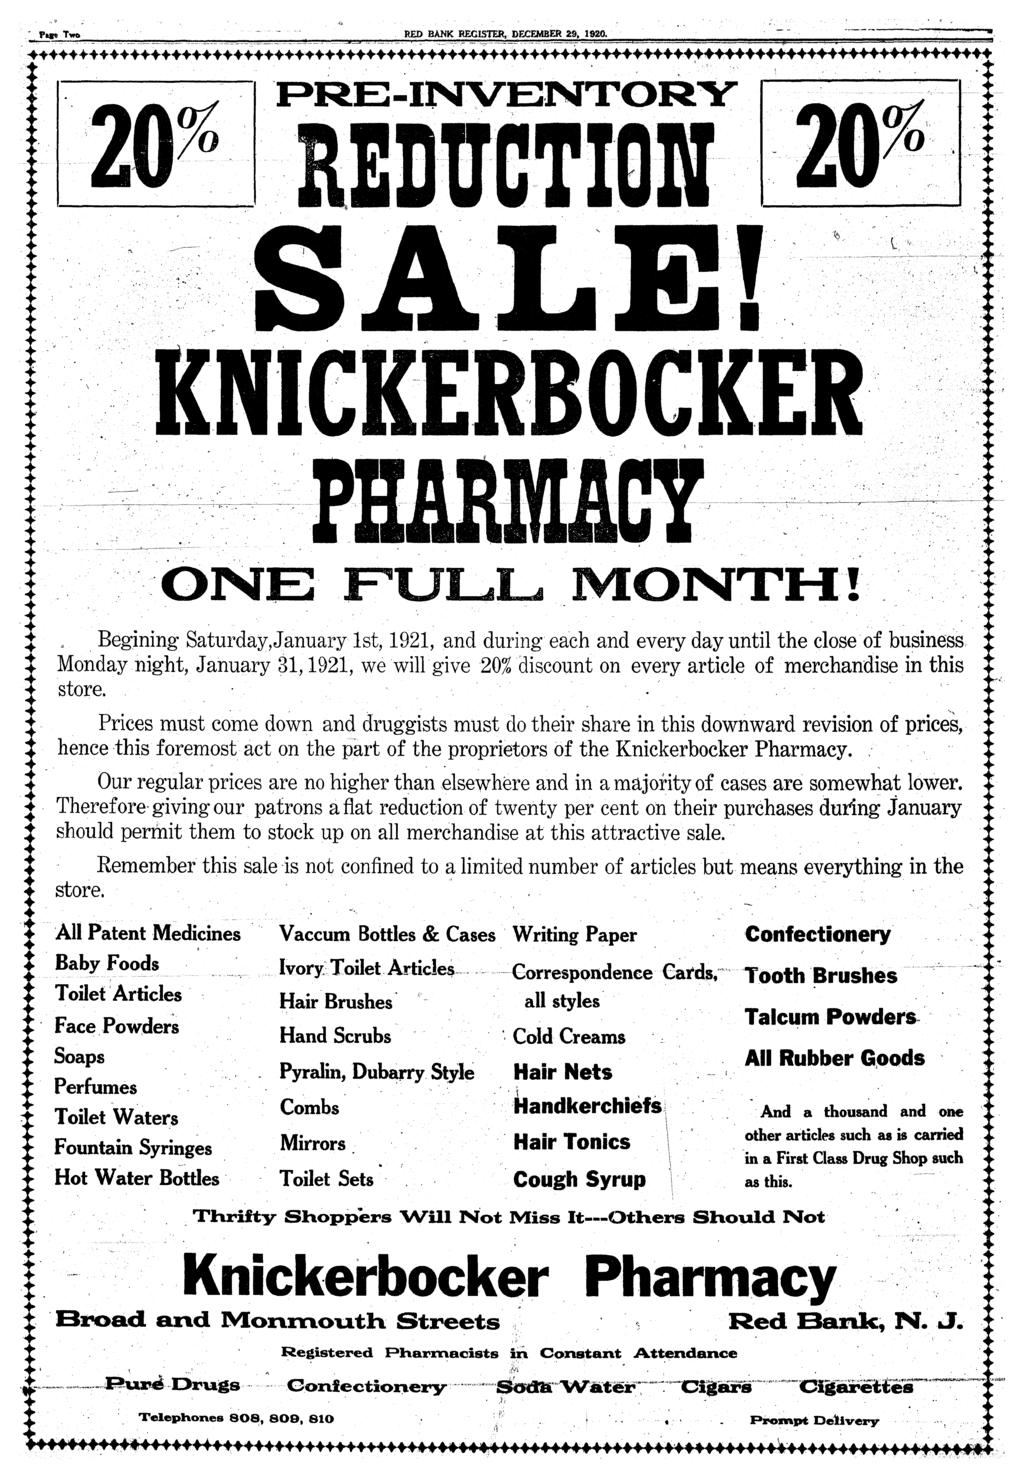 TW RED BANK REGSTER, DECEMBER 29, 1920. PRE-NVENTORY UCTON» *>+ KNCKERBOCKER ONE FULL MONTH! 4.